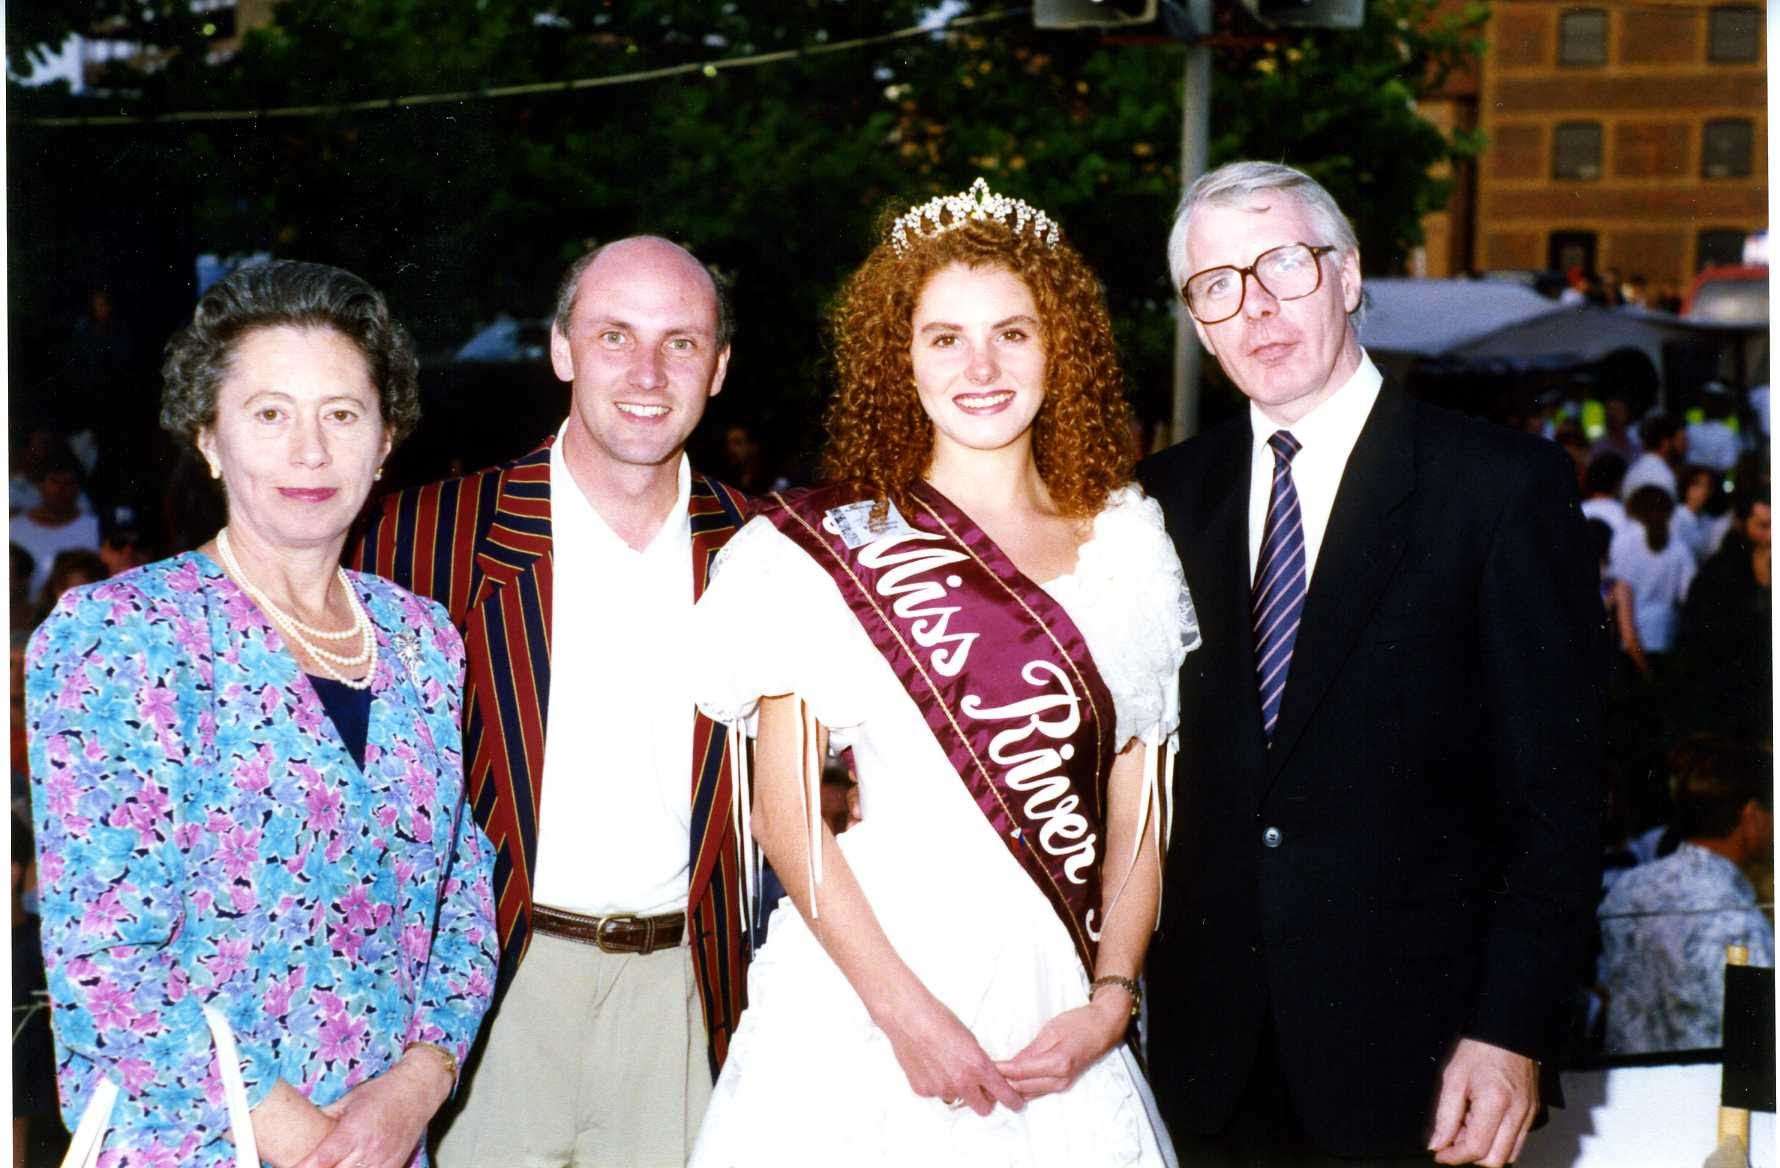 'The Queen', Howard Leader from BBC's That's Life, Miss Maidstone River Festival and the Prime Minister 'John Major' at the Maidstone Festival Of Europe